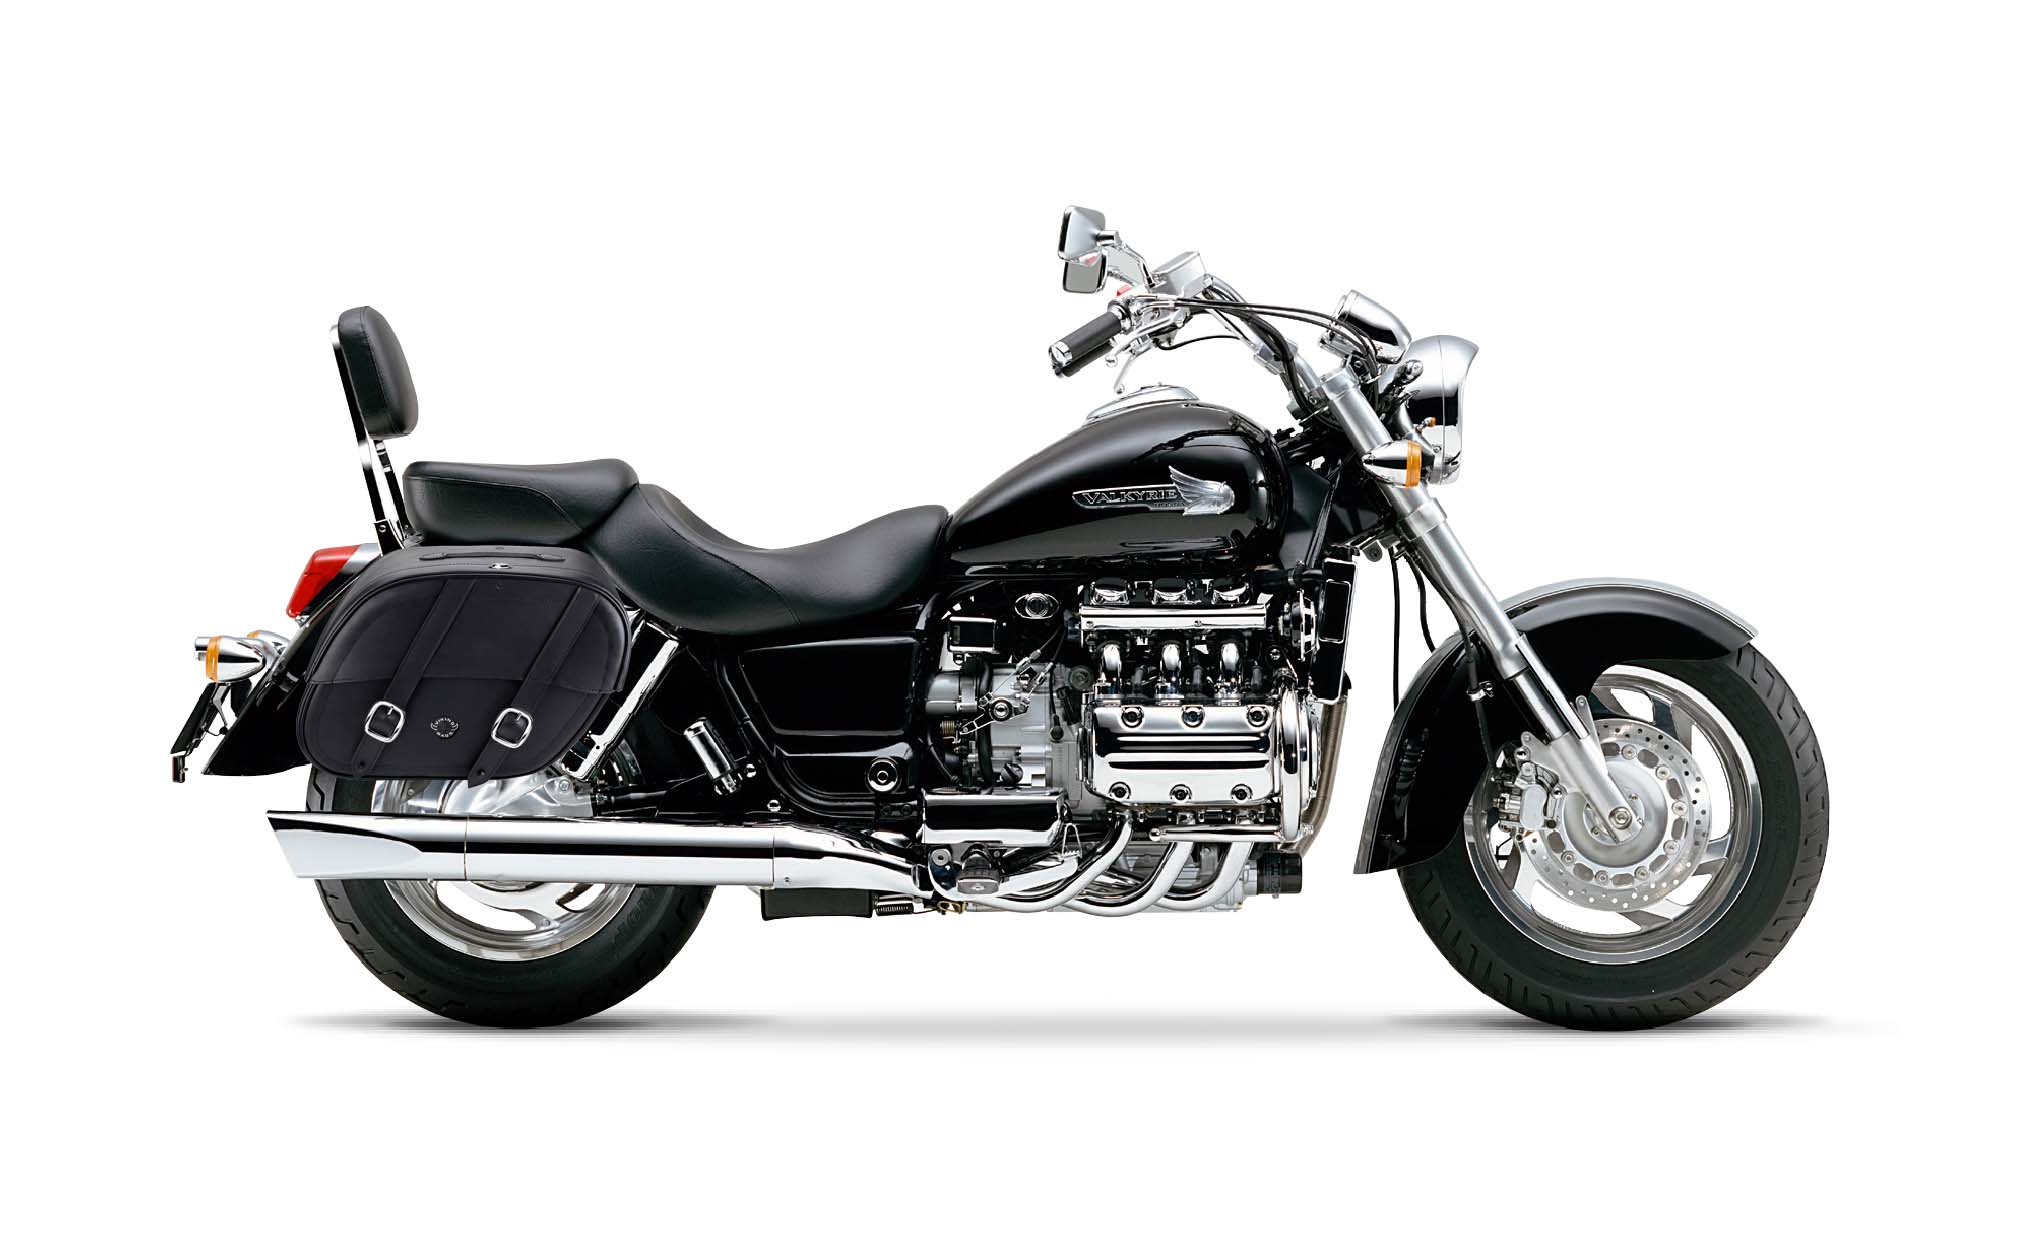 Viking Club Large Honda Valkyrie 1500 Standard Shock Cut Out Leather Motorcycle Saddlebags on Bike Photo @expand